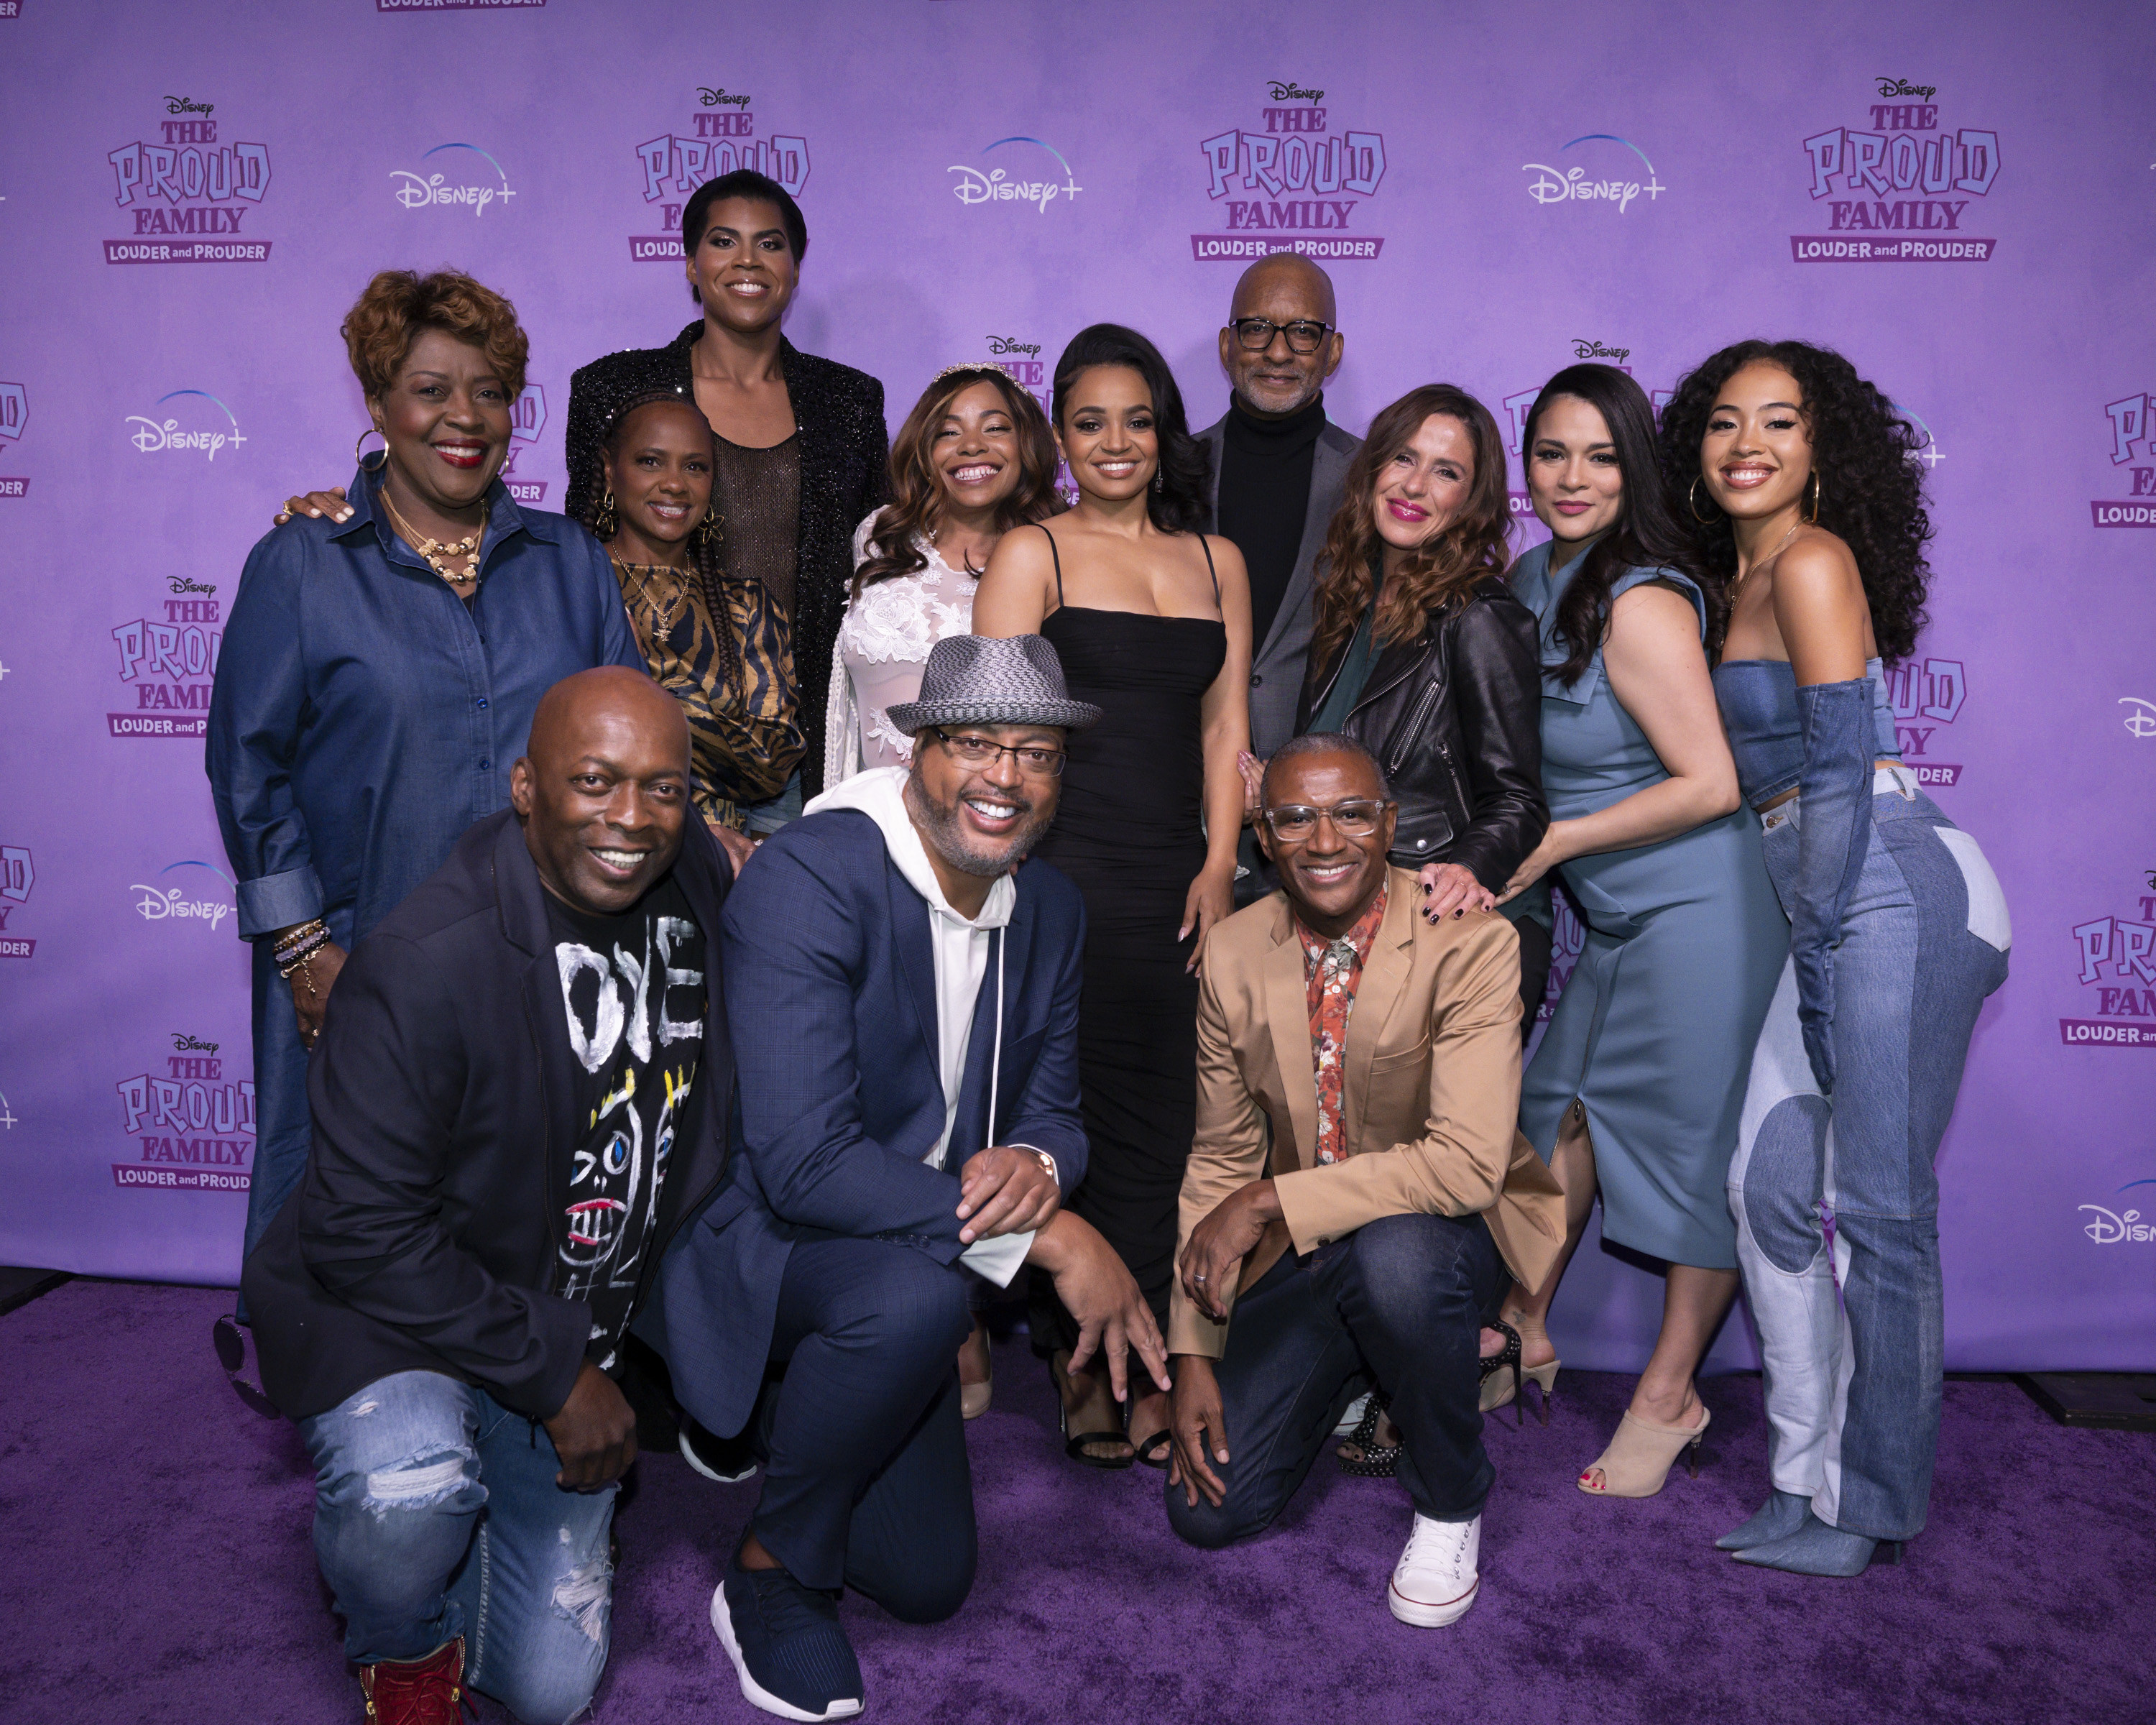 The Proud Family cast and creators on the red carpet.